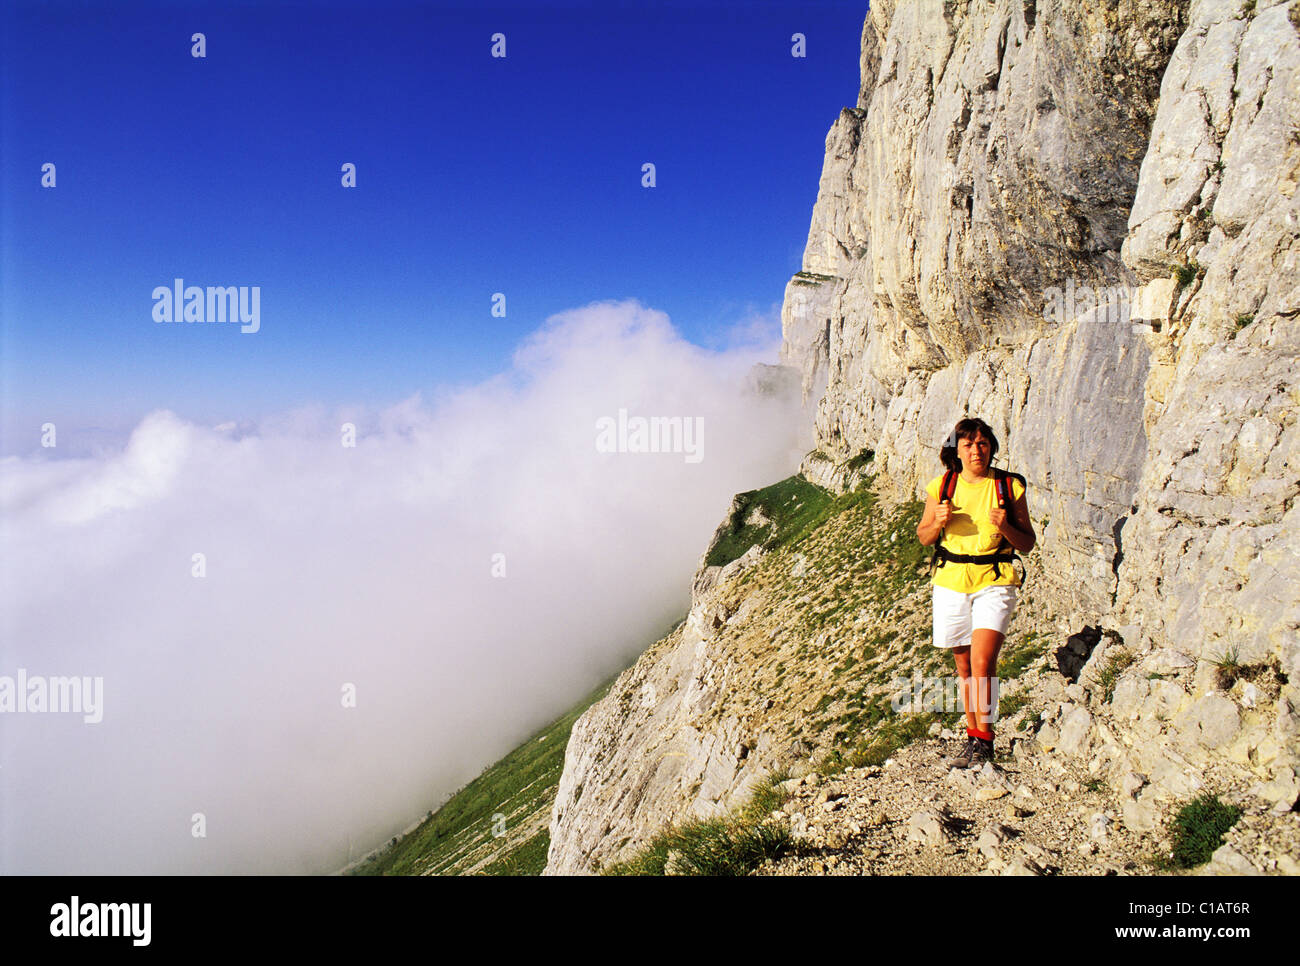 France, Isere, hike to the Rocher des Deux Soeurs in the Vercors natural regional park Stock Photo